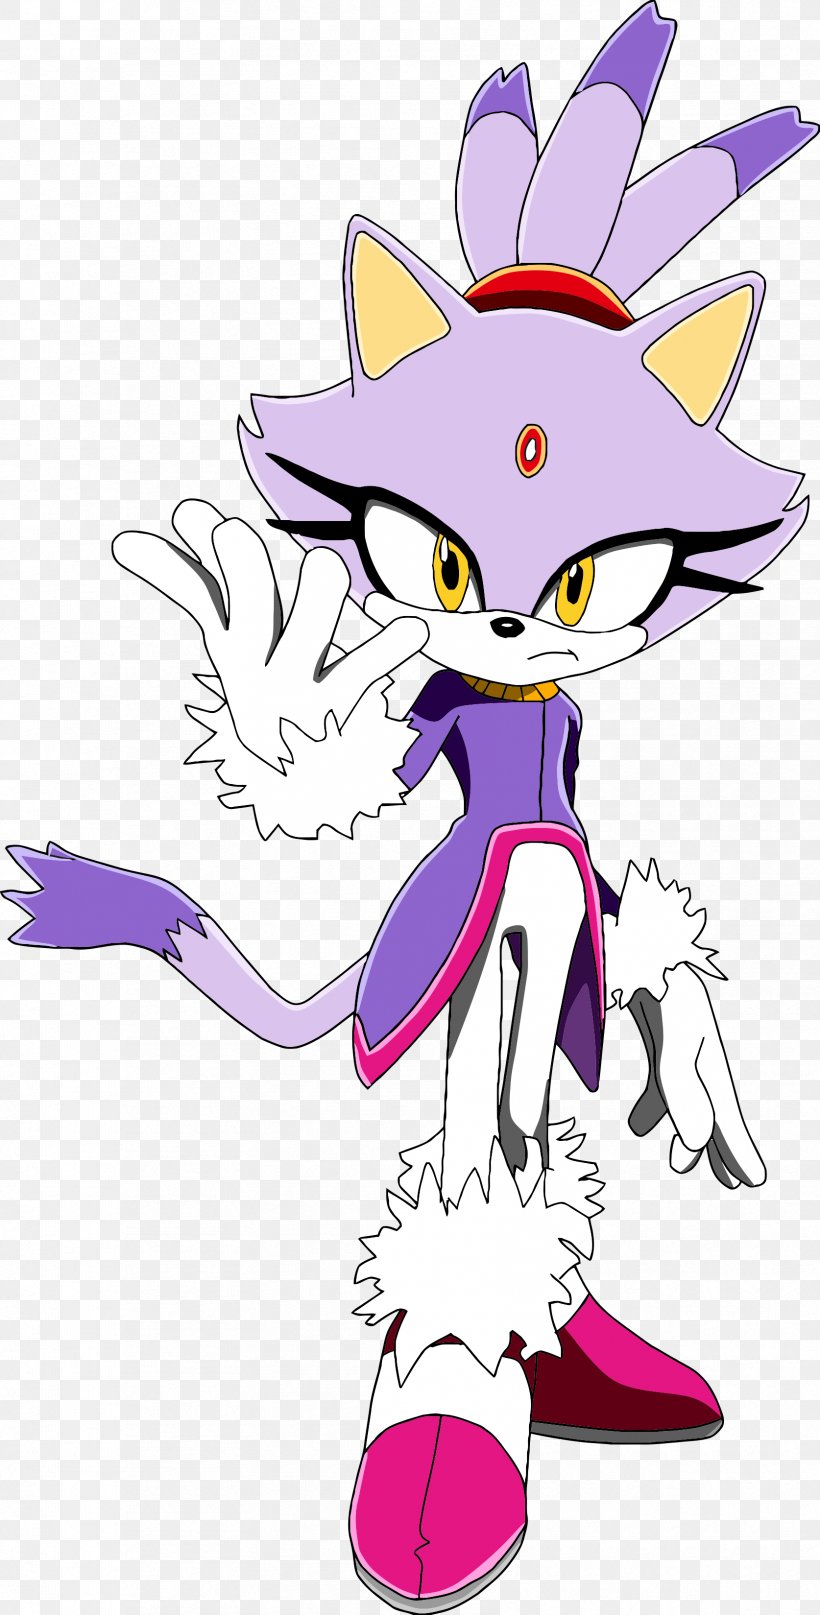 silver the hedgehog and blaze the cat story